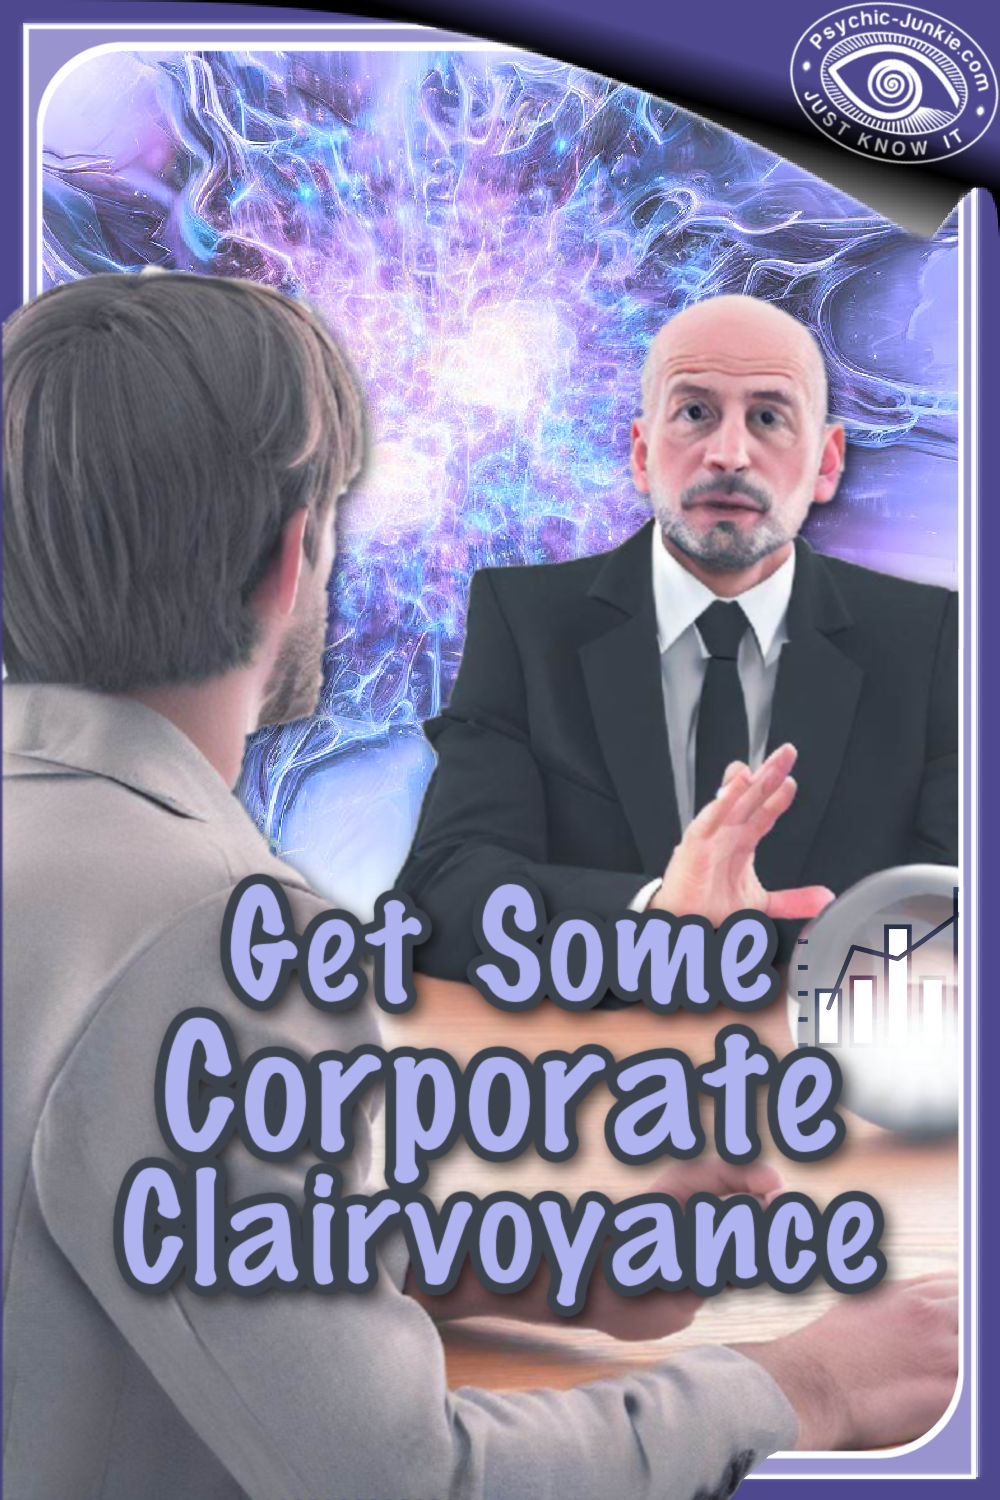 Corporate Clairvoyance